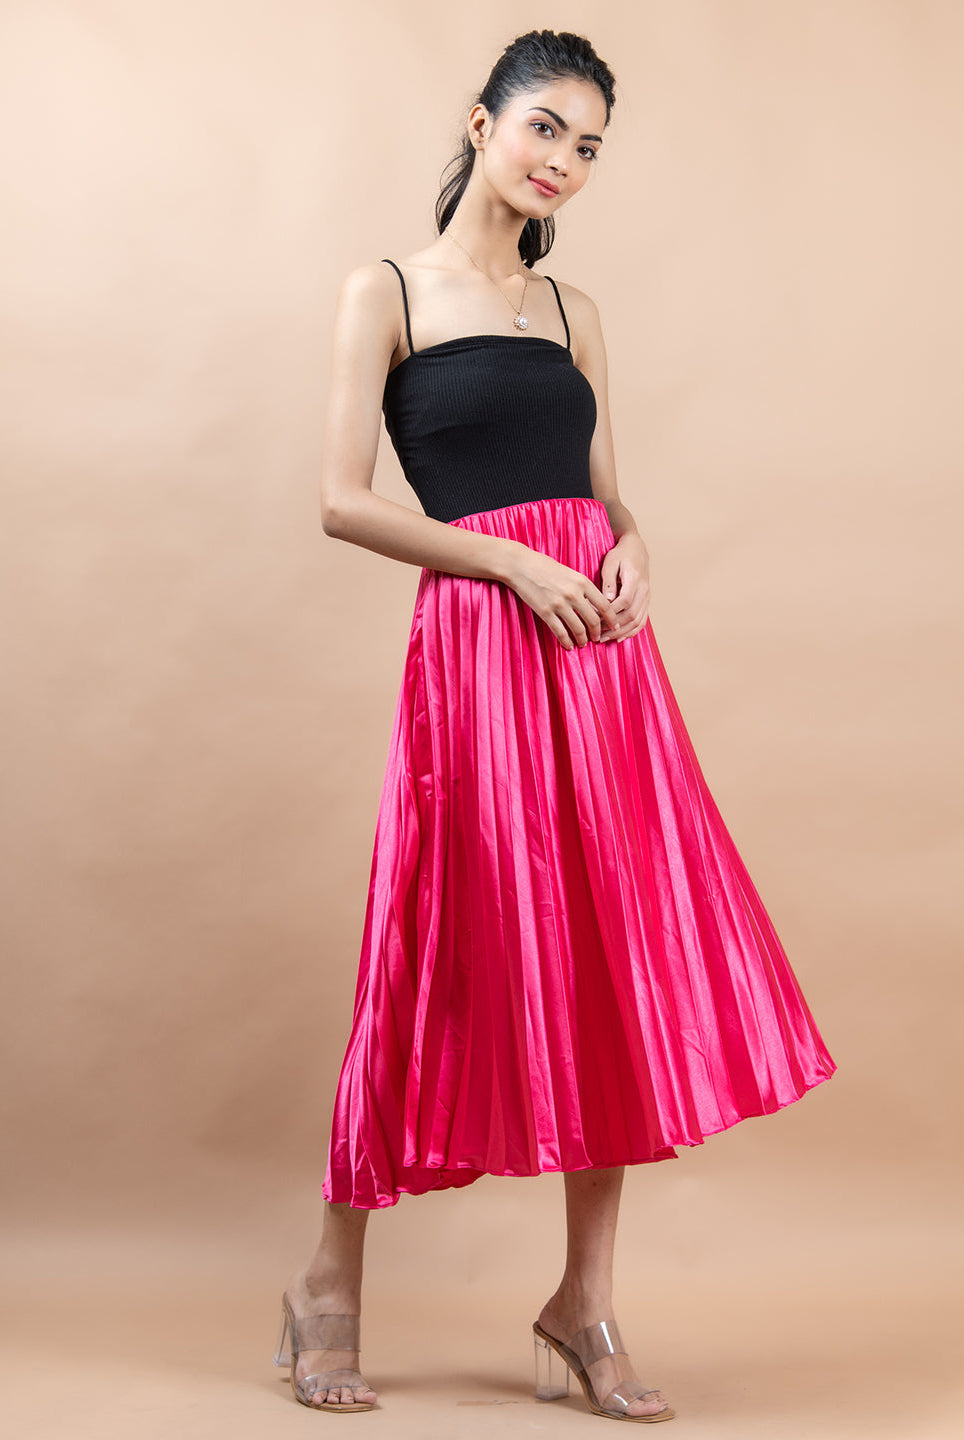 long skirt with top